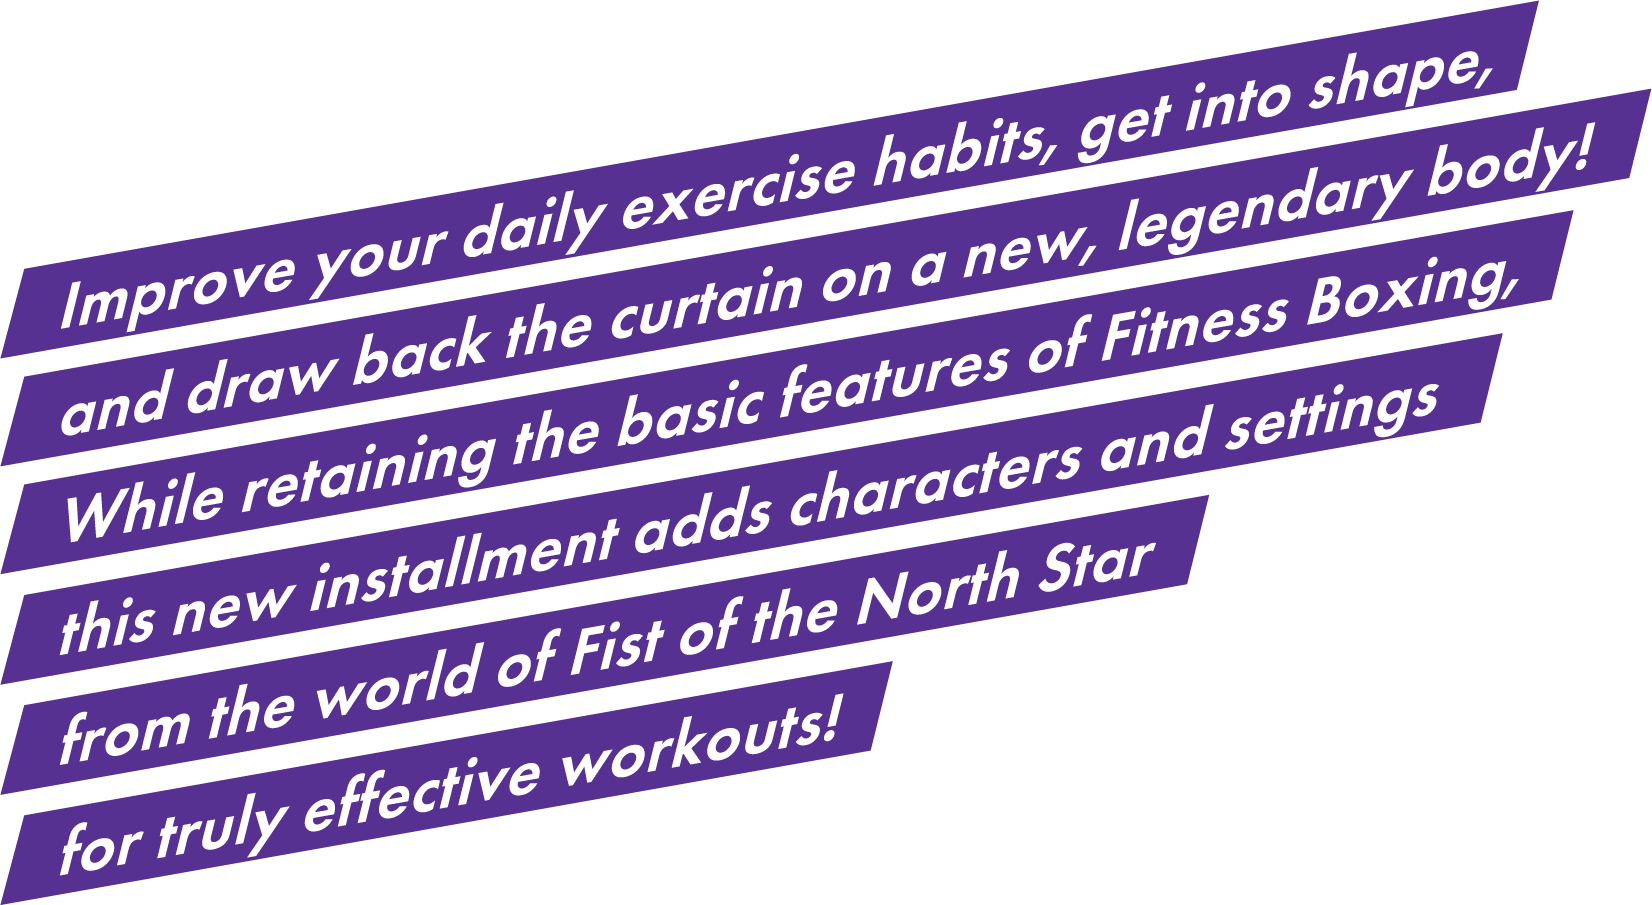 Improve your daily exercise habits, get into shape, and draw back the curtain on a new, legendary body! While retaining the basic features of Fitness Boxing, this new installment adds characters and settings from the world of Fist of the North Star for truly effective workouts!